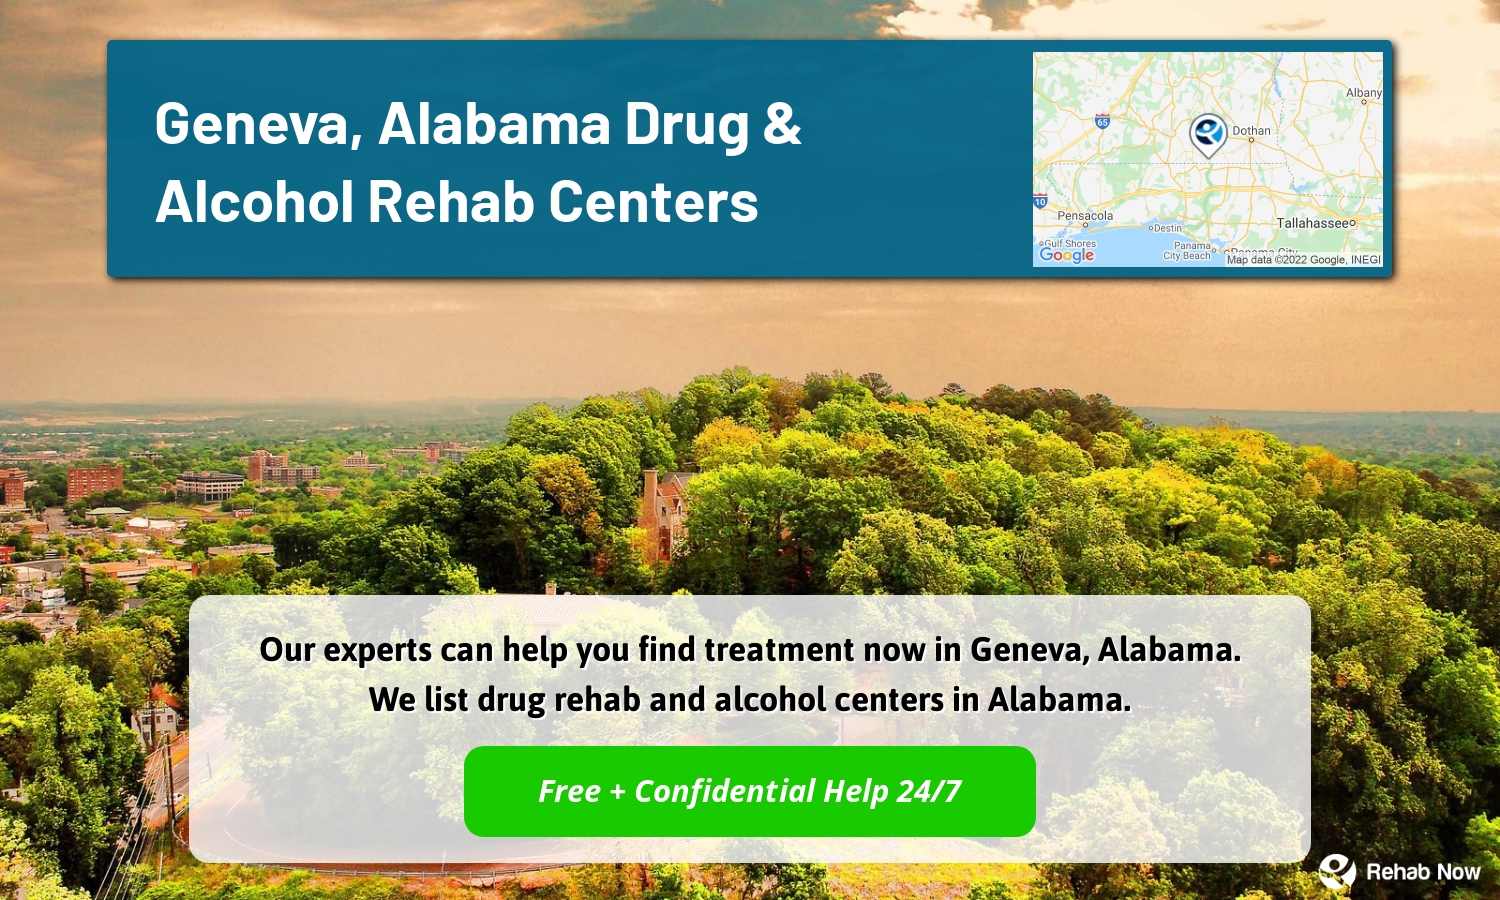 Our experts can help you find treatment now in Geneva, Alabama. We list drug rehab and alcohol centers in Alabama.